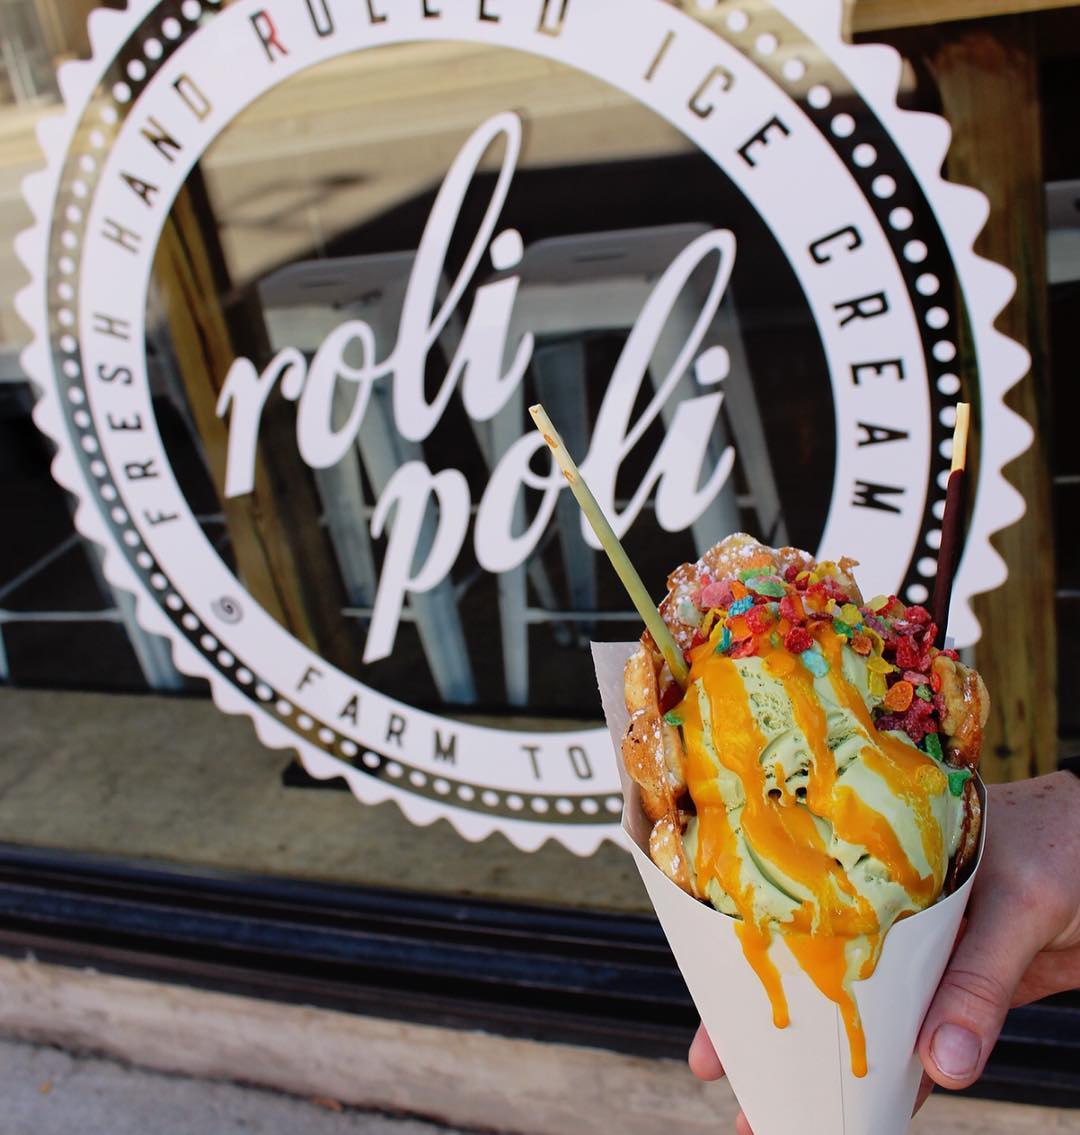 roli ice cream in cone held in front of parlour sign and logo in front of store